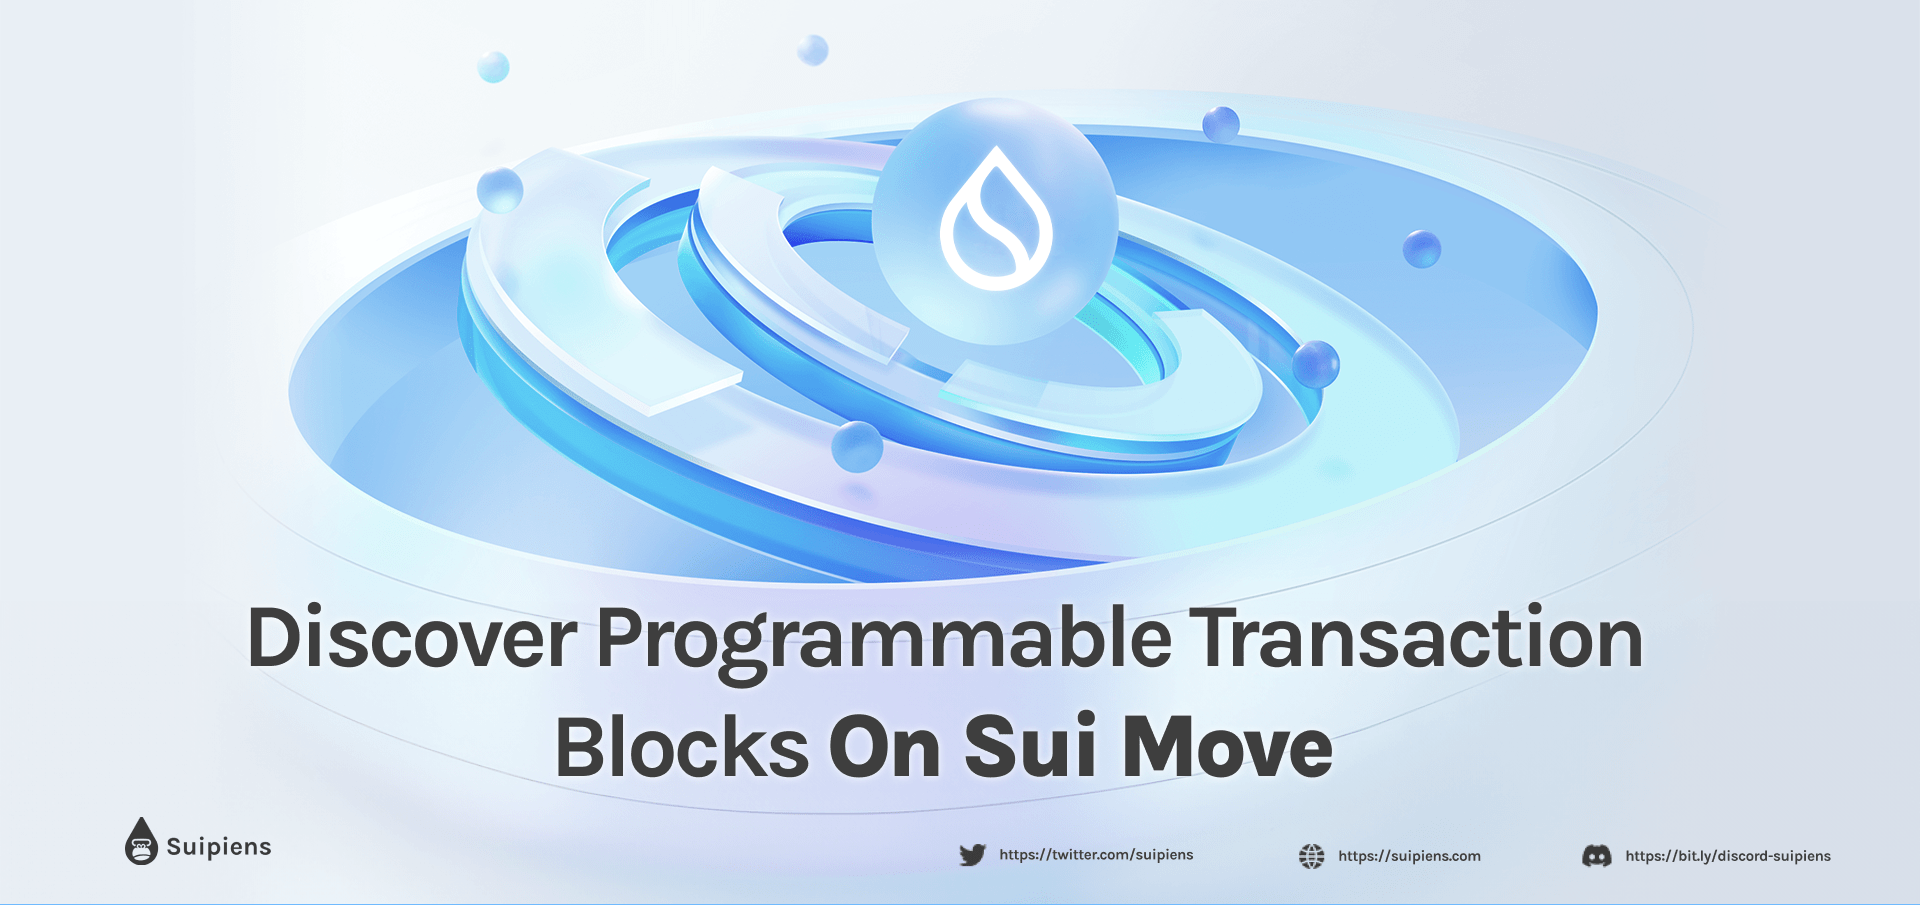 Discover Programmable Transaction Blocks on Sui Move